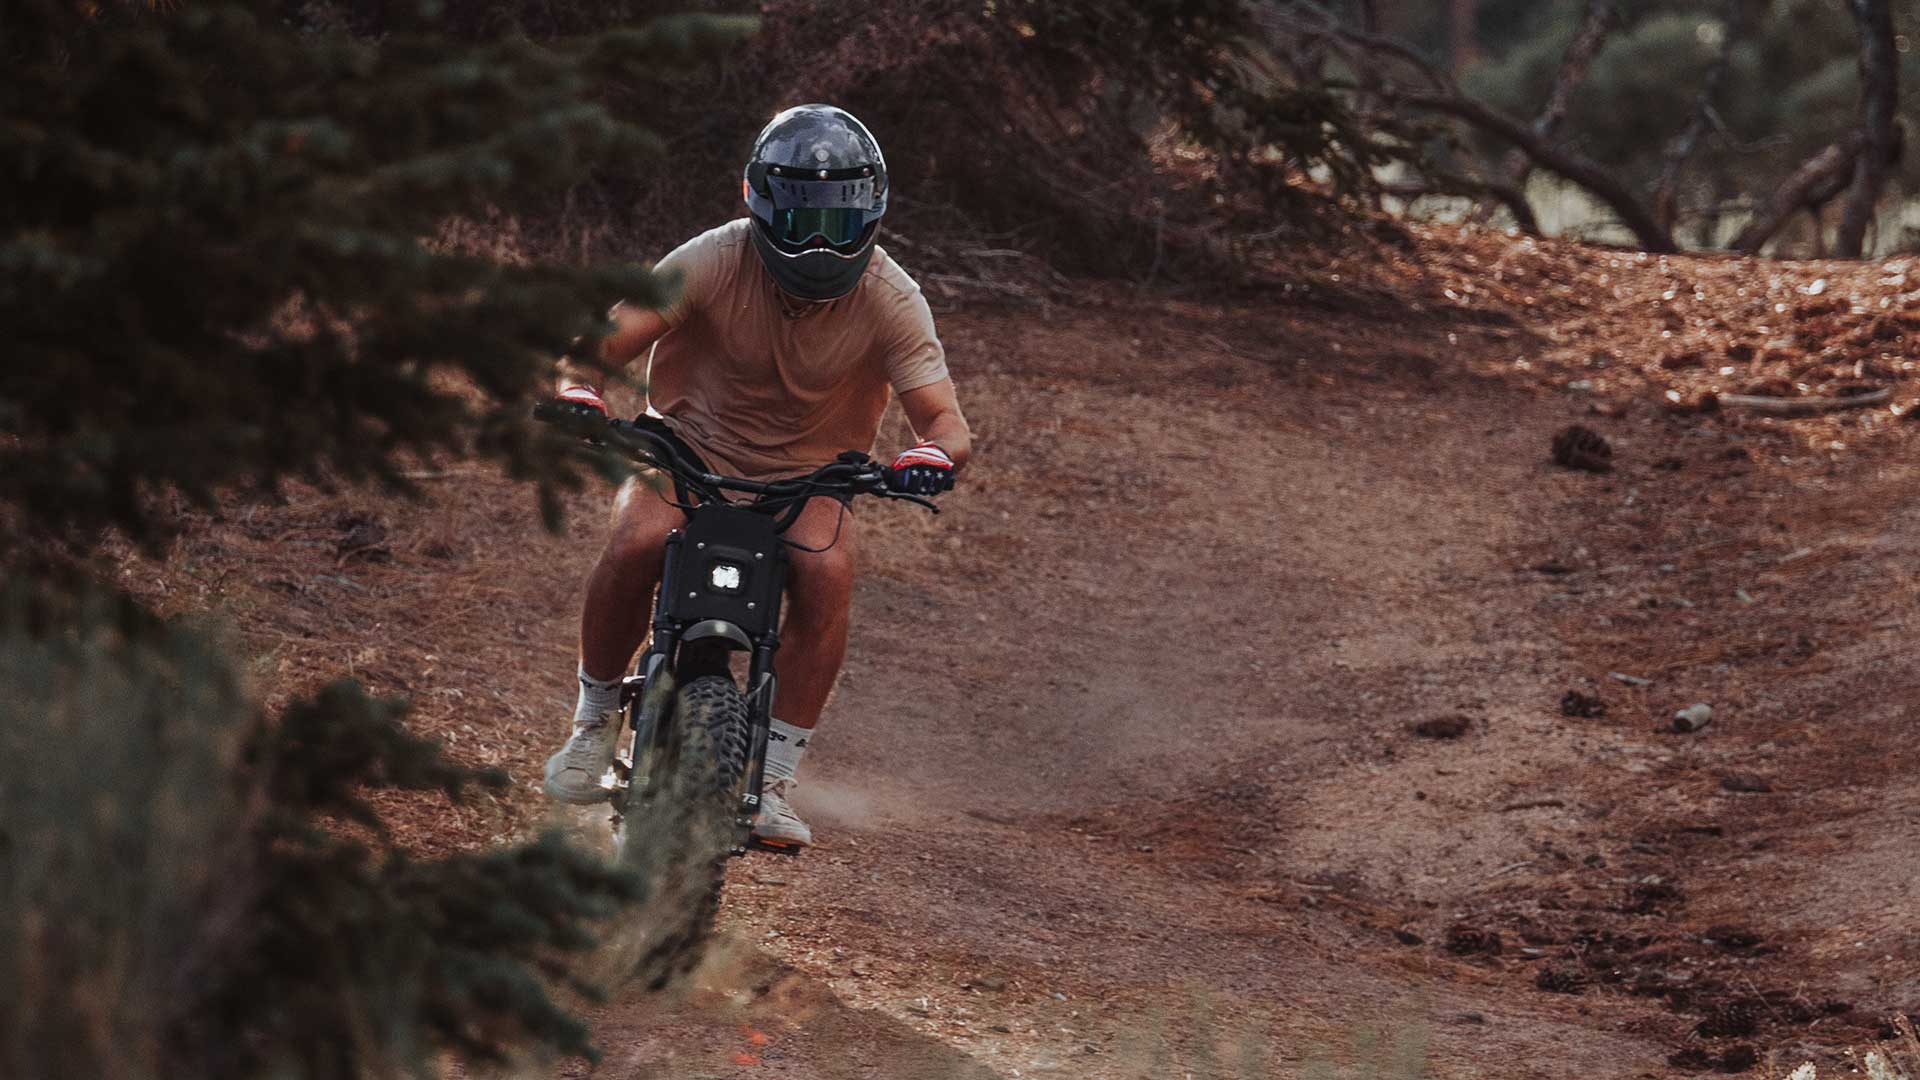 Rider on Super73 RX charging down a dirt path with a helmet